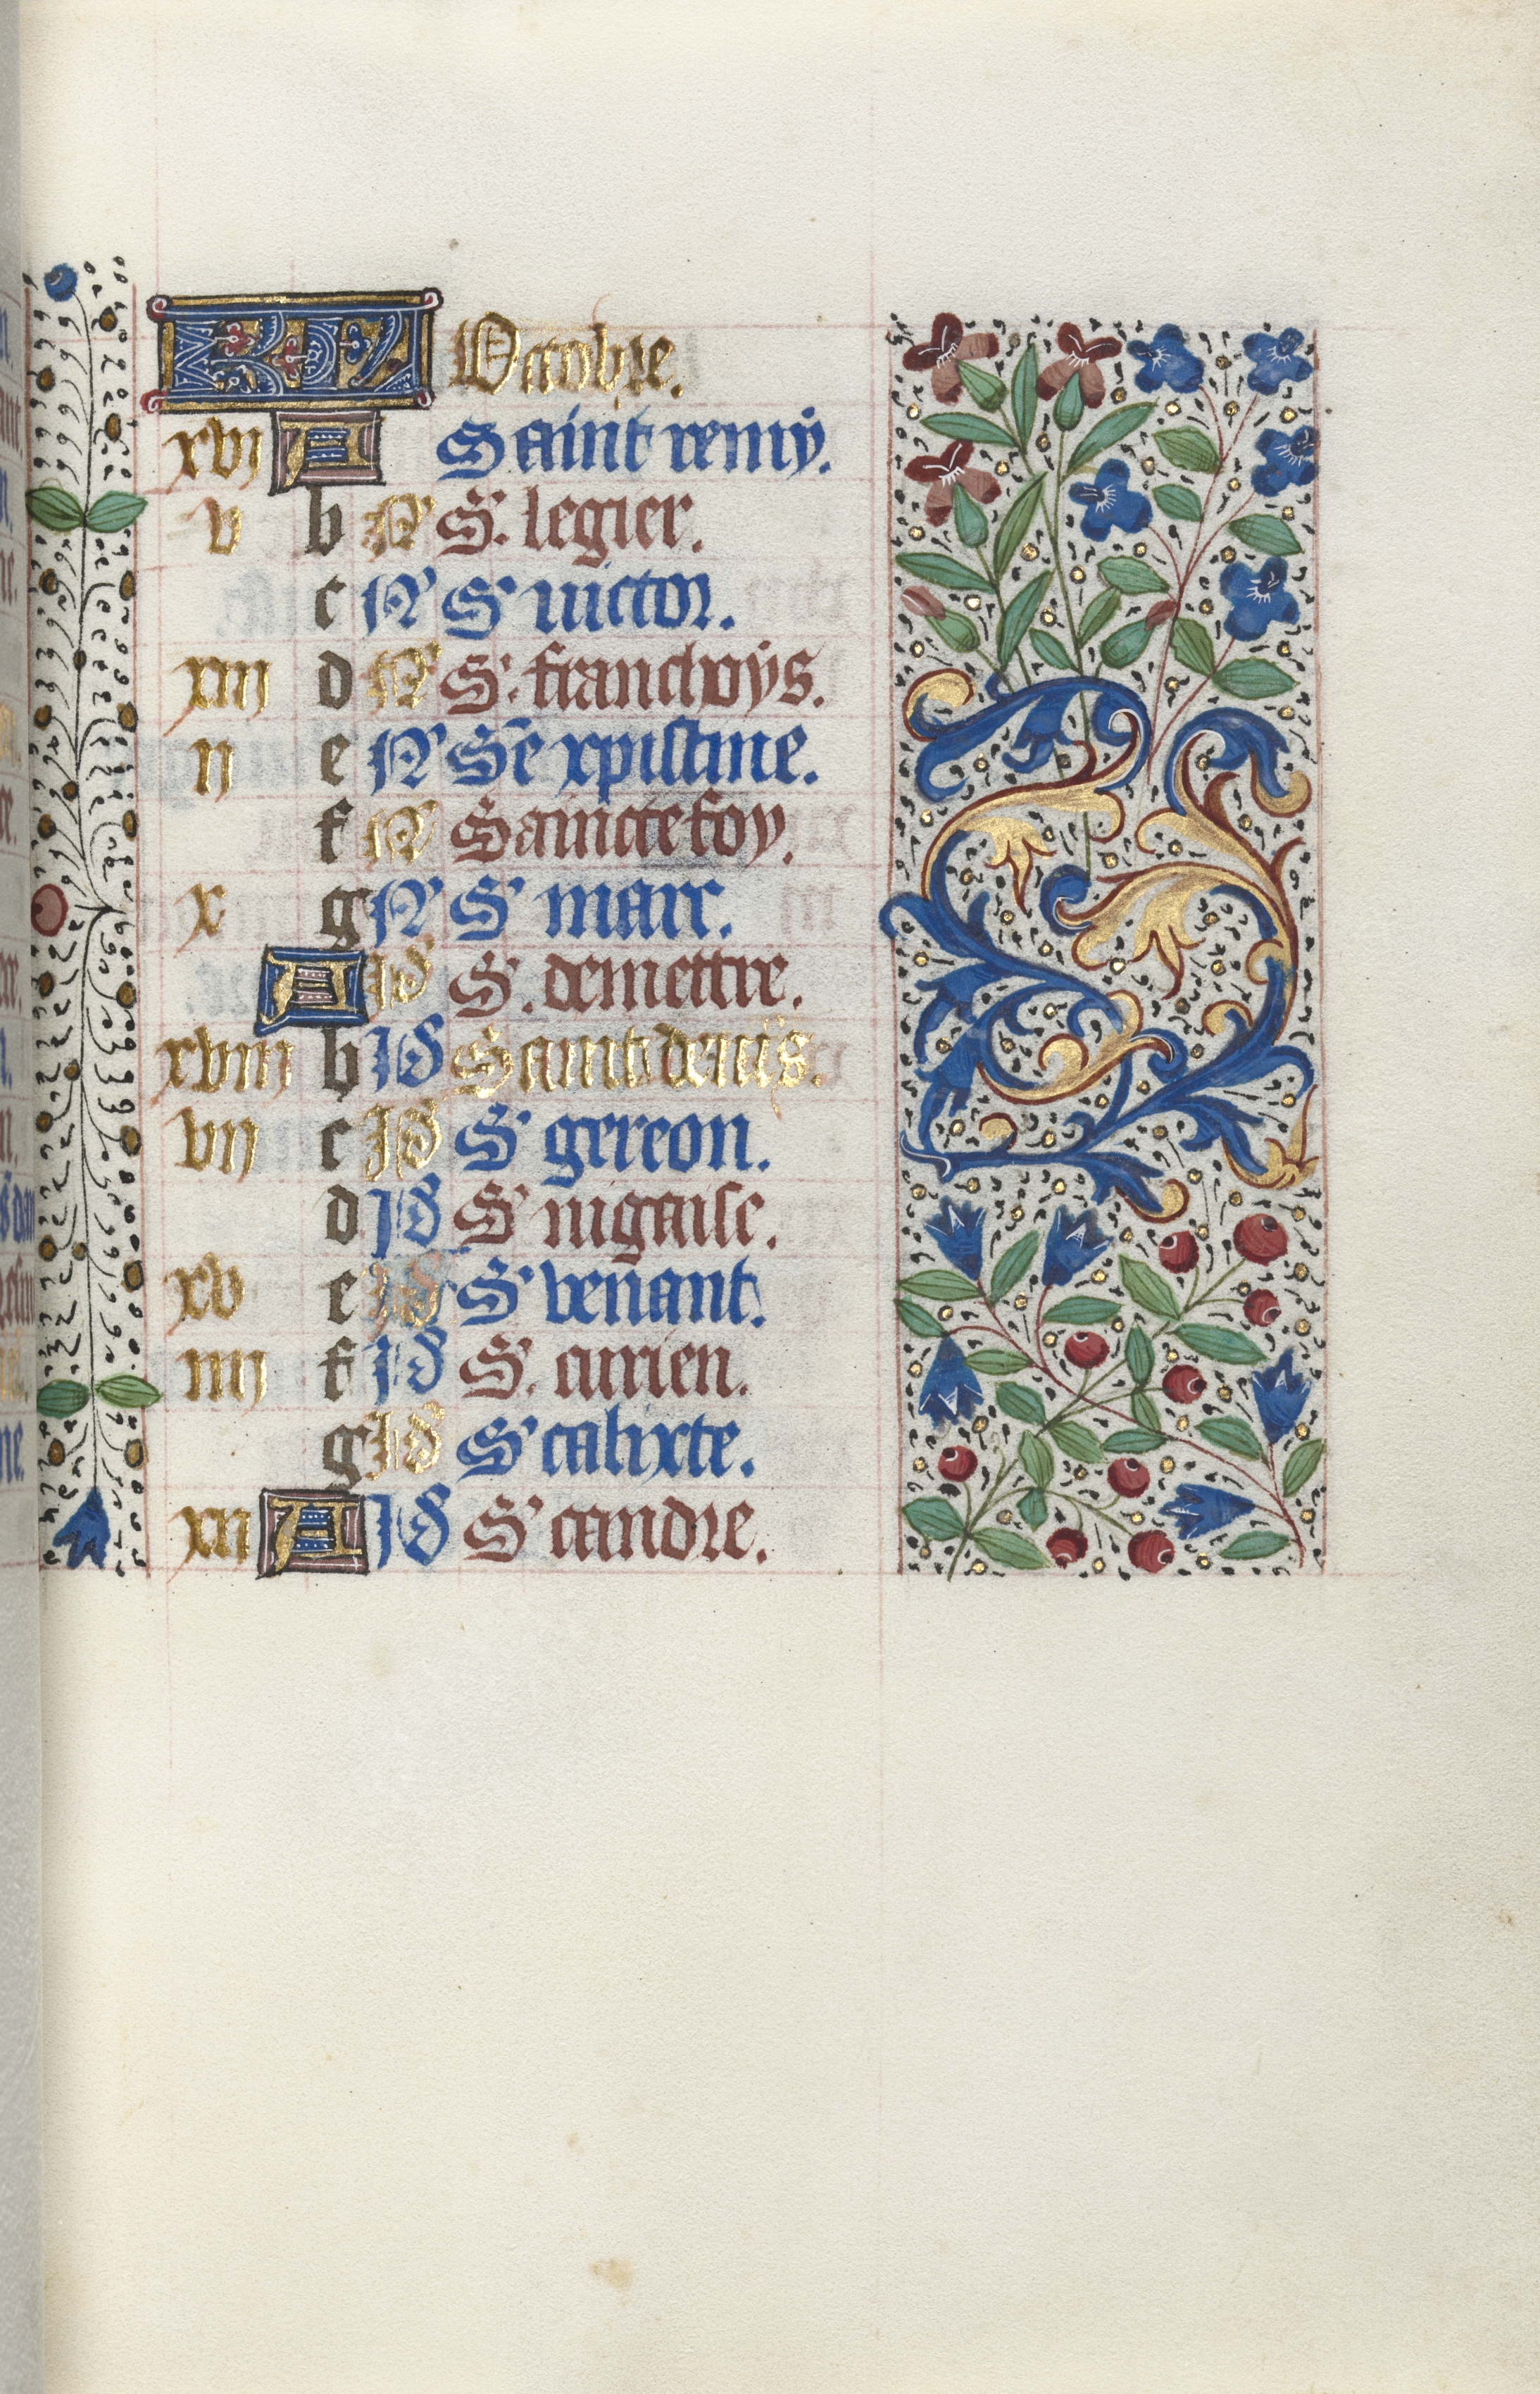 Book of Hours (Use of Rouen): fol. 10r, Calendar Page for October